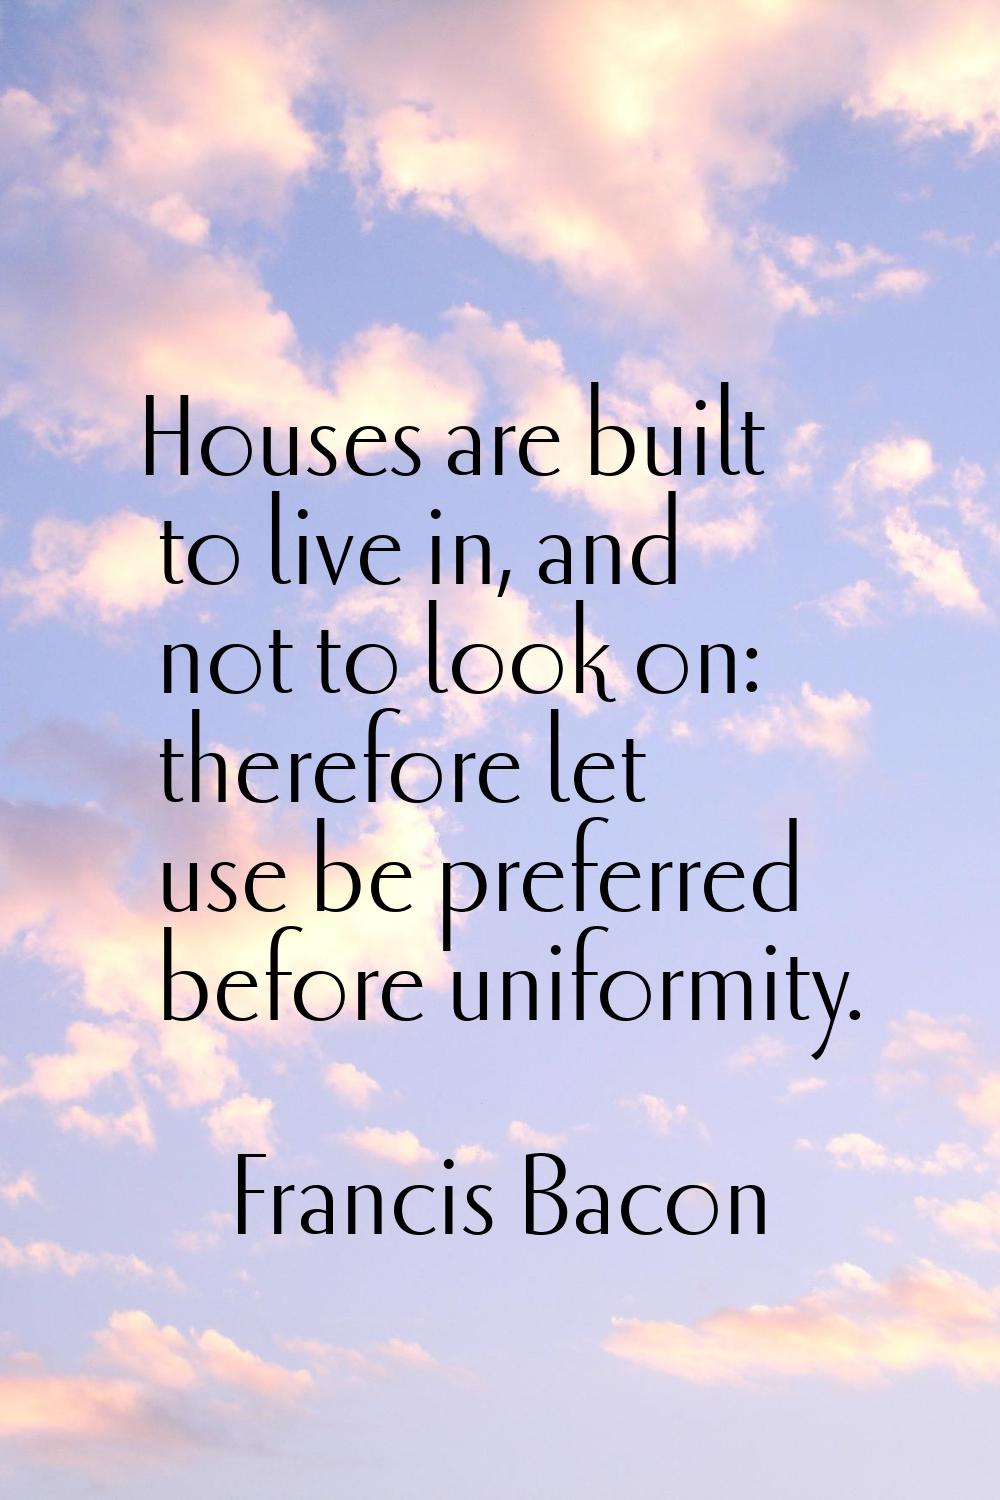 Houses are built to live in, and not to look on: therefore let use be preferred before uniformity.